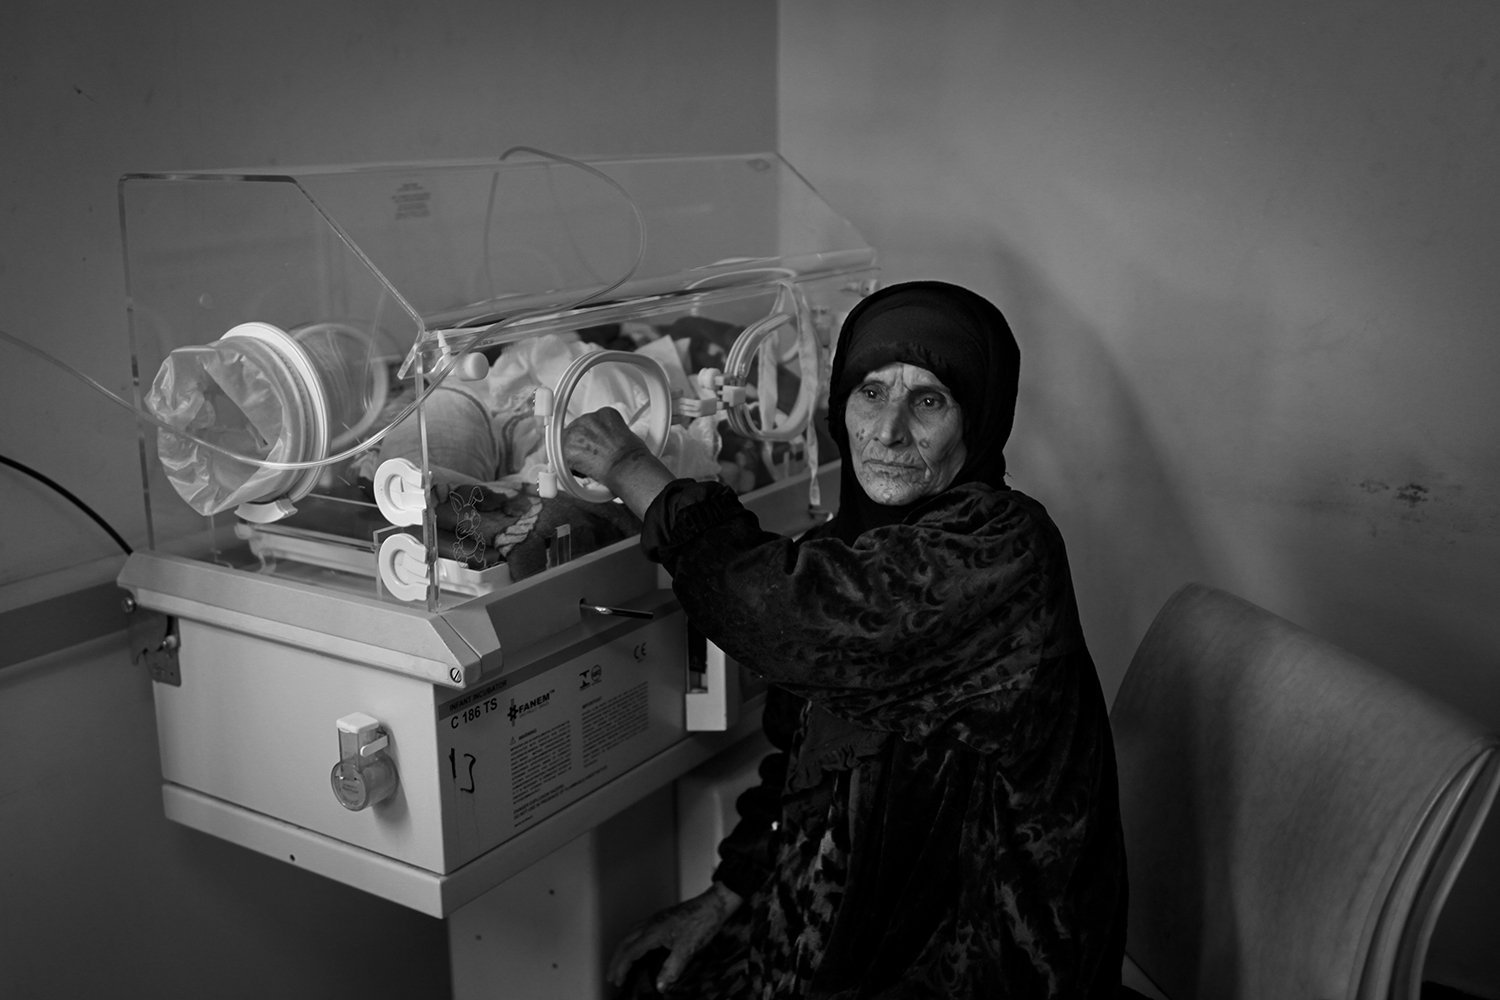 Apr. 18, 2012. Fallujah. An elderly woman holds her granddaughter's hand inside an incubator in the neonatal ward of the General Hospital. The child was born with leukemia and cerebral tumors.